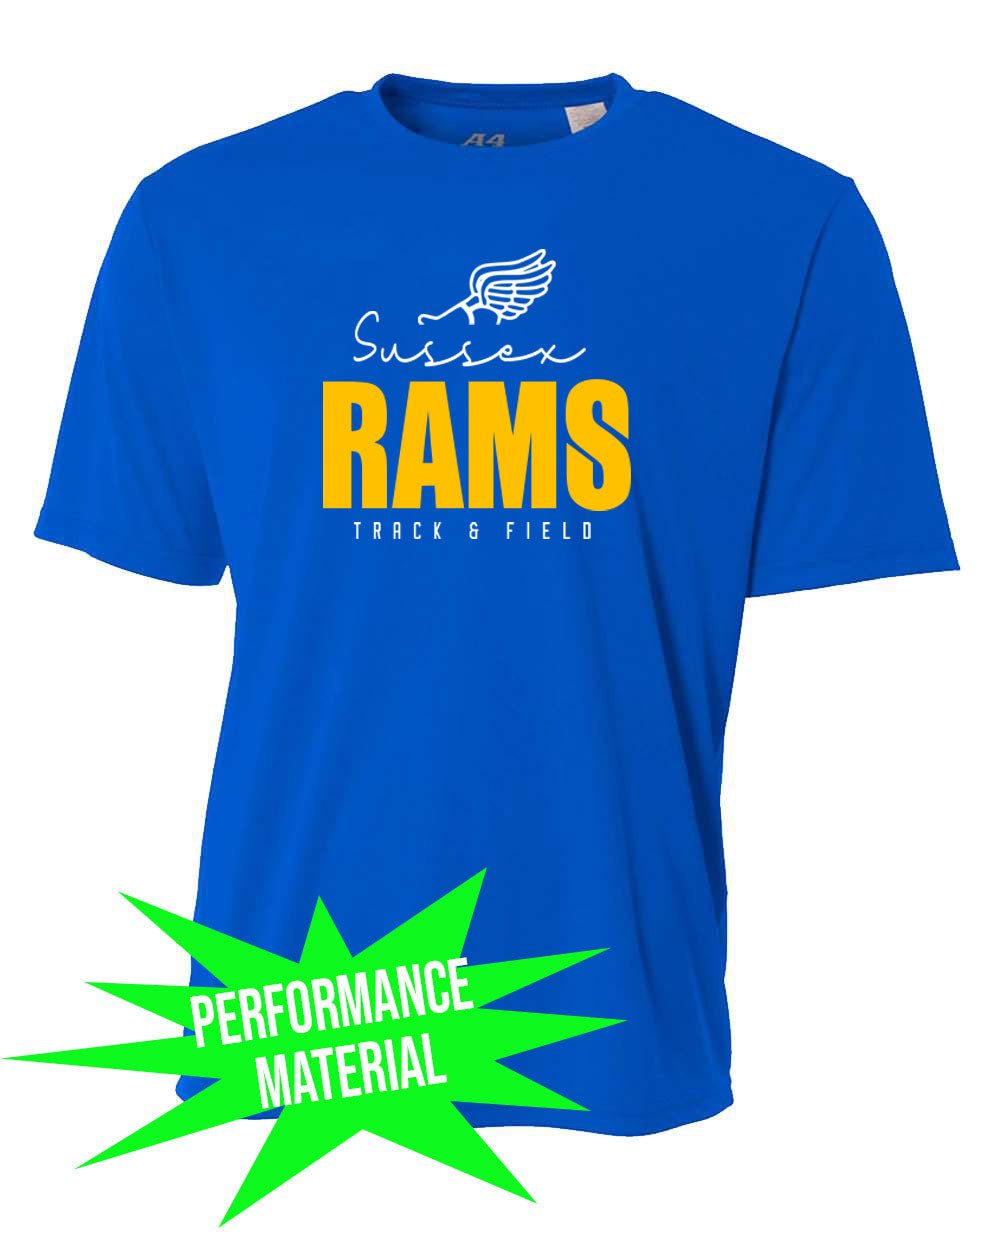 Sussex Rams Track Performance Material T-Shirt Design 4